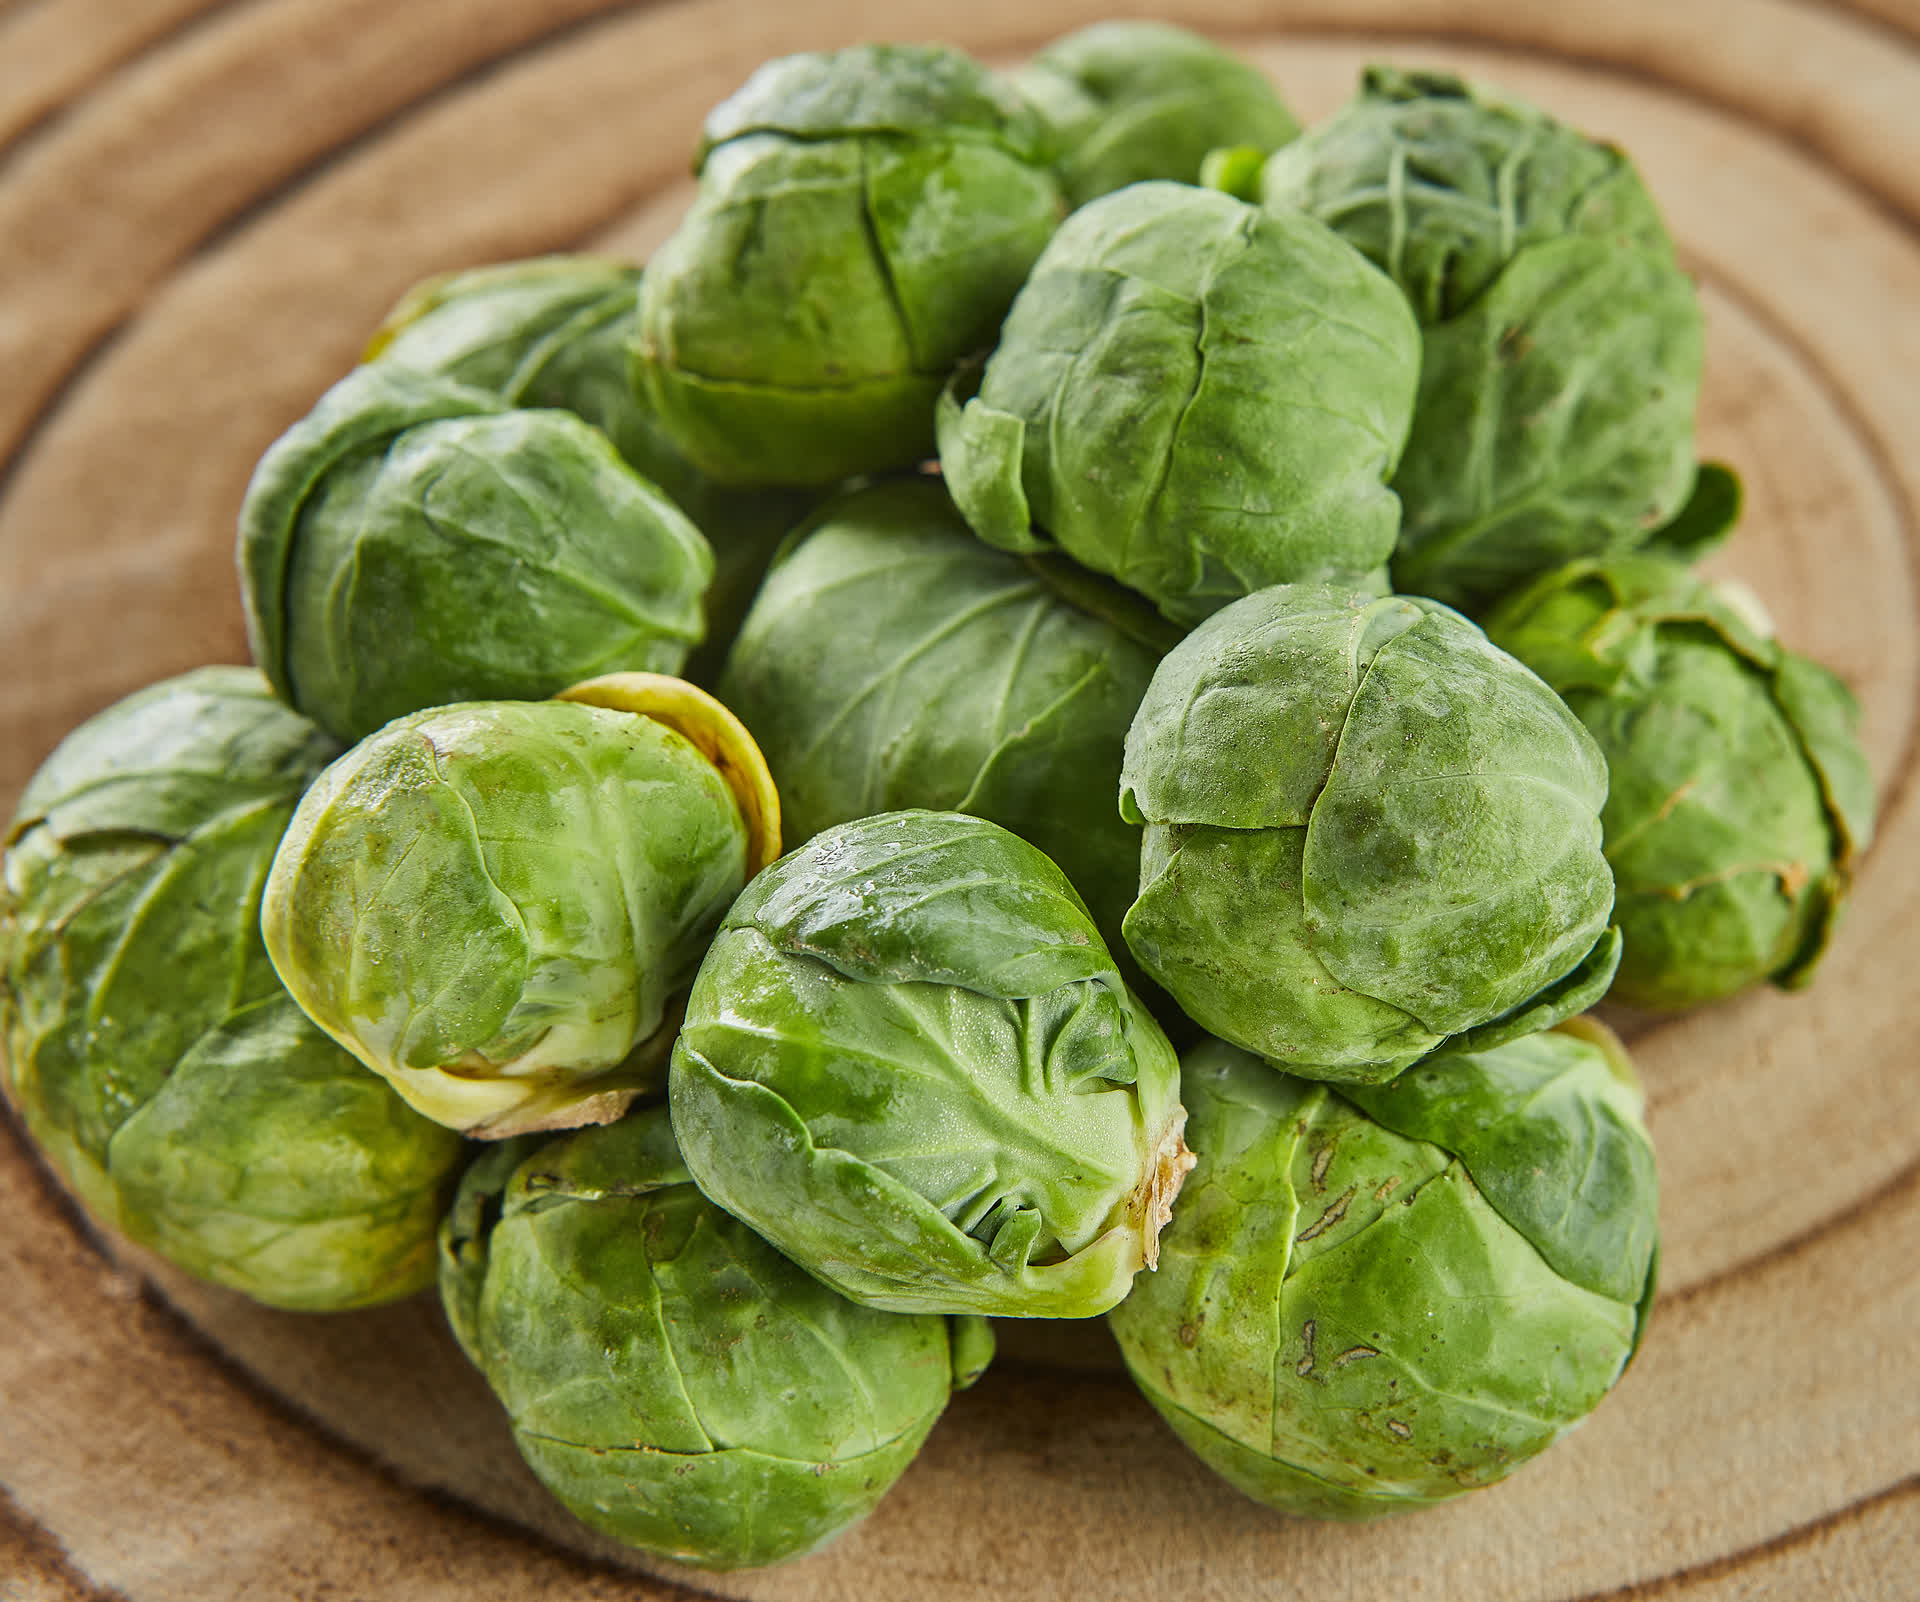 How to Use Brussels Sprouts